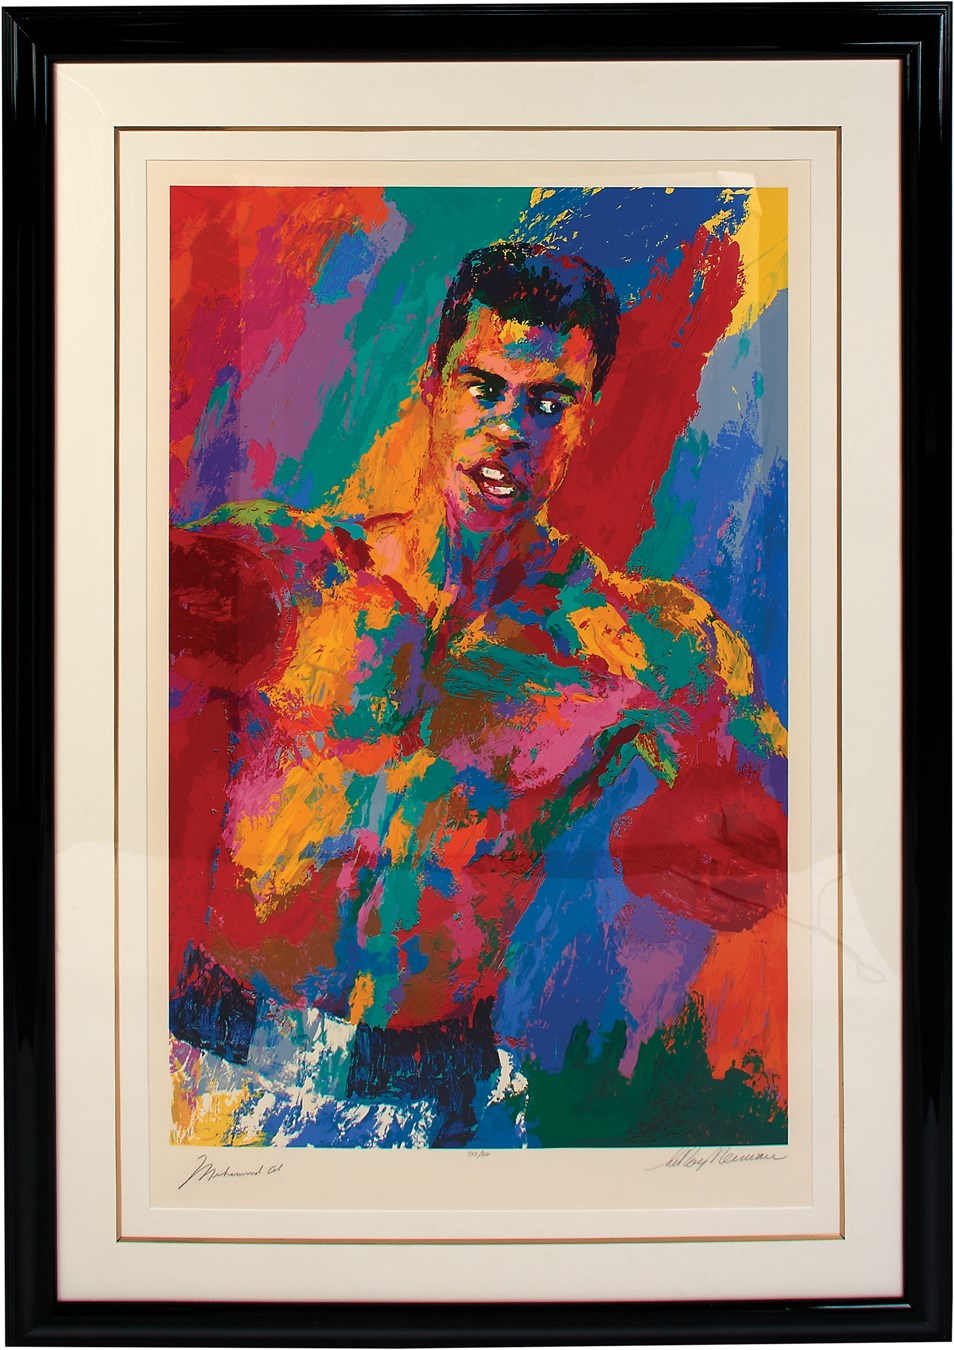 - Muhammad Ali Signed "Athlete of the Century" Limited Edition Serigraph by LeRoy Neiman